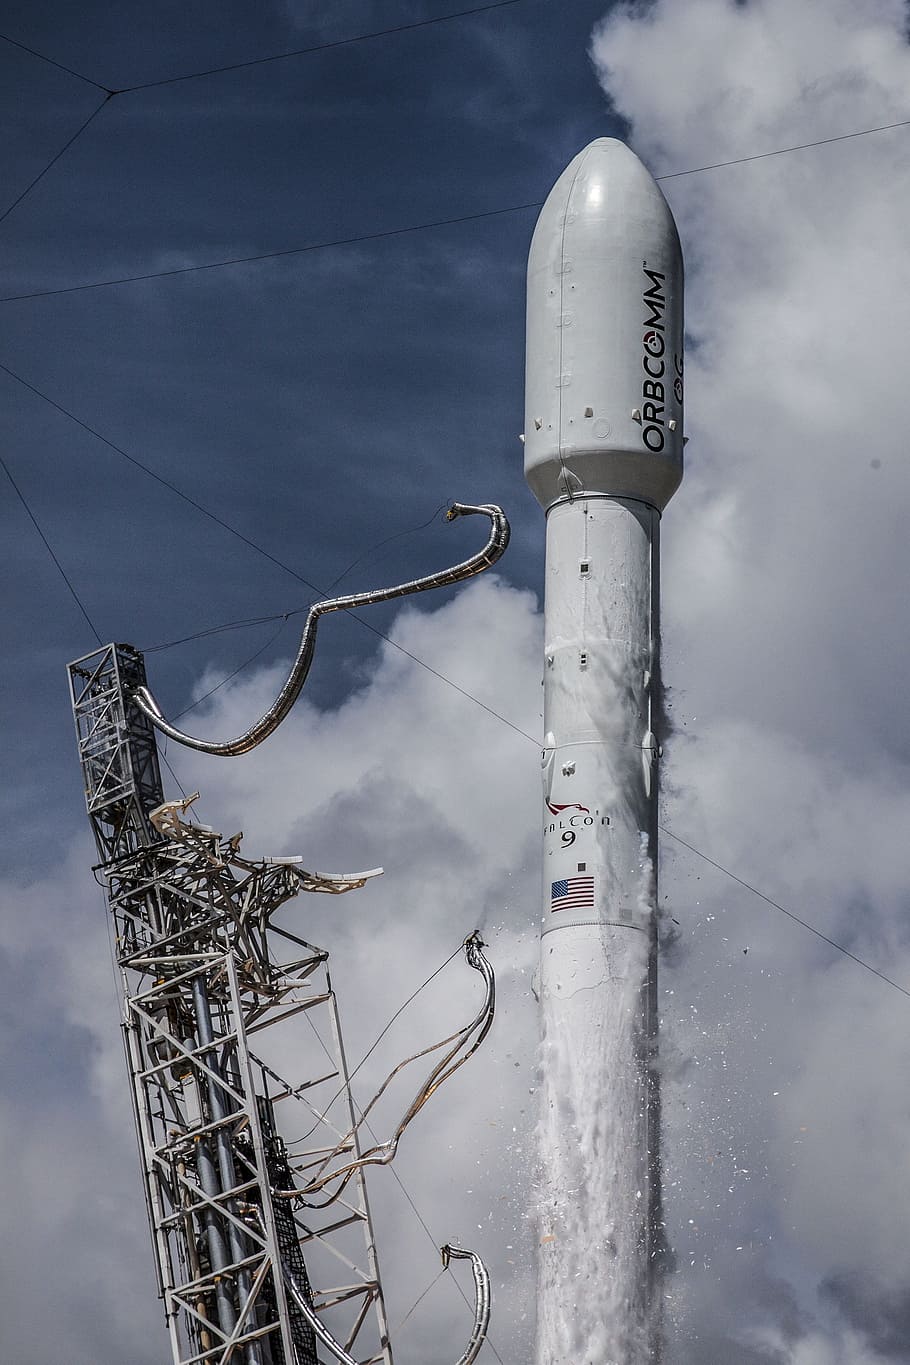 white obrcomm rocket, Rocket Launch, Spacex, Lift-Off, launch, flames, propulsion, space, rocket, speed